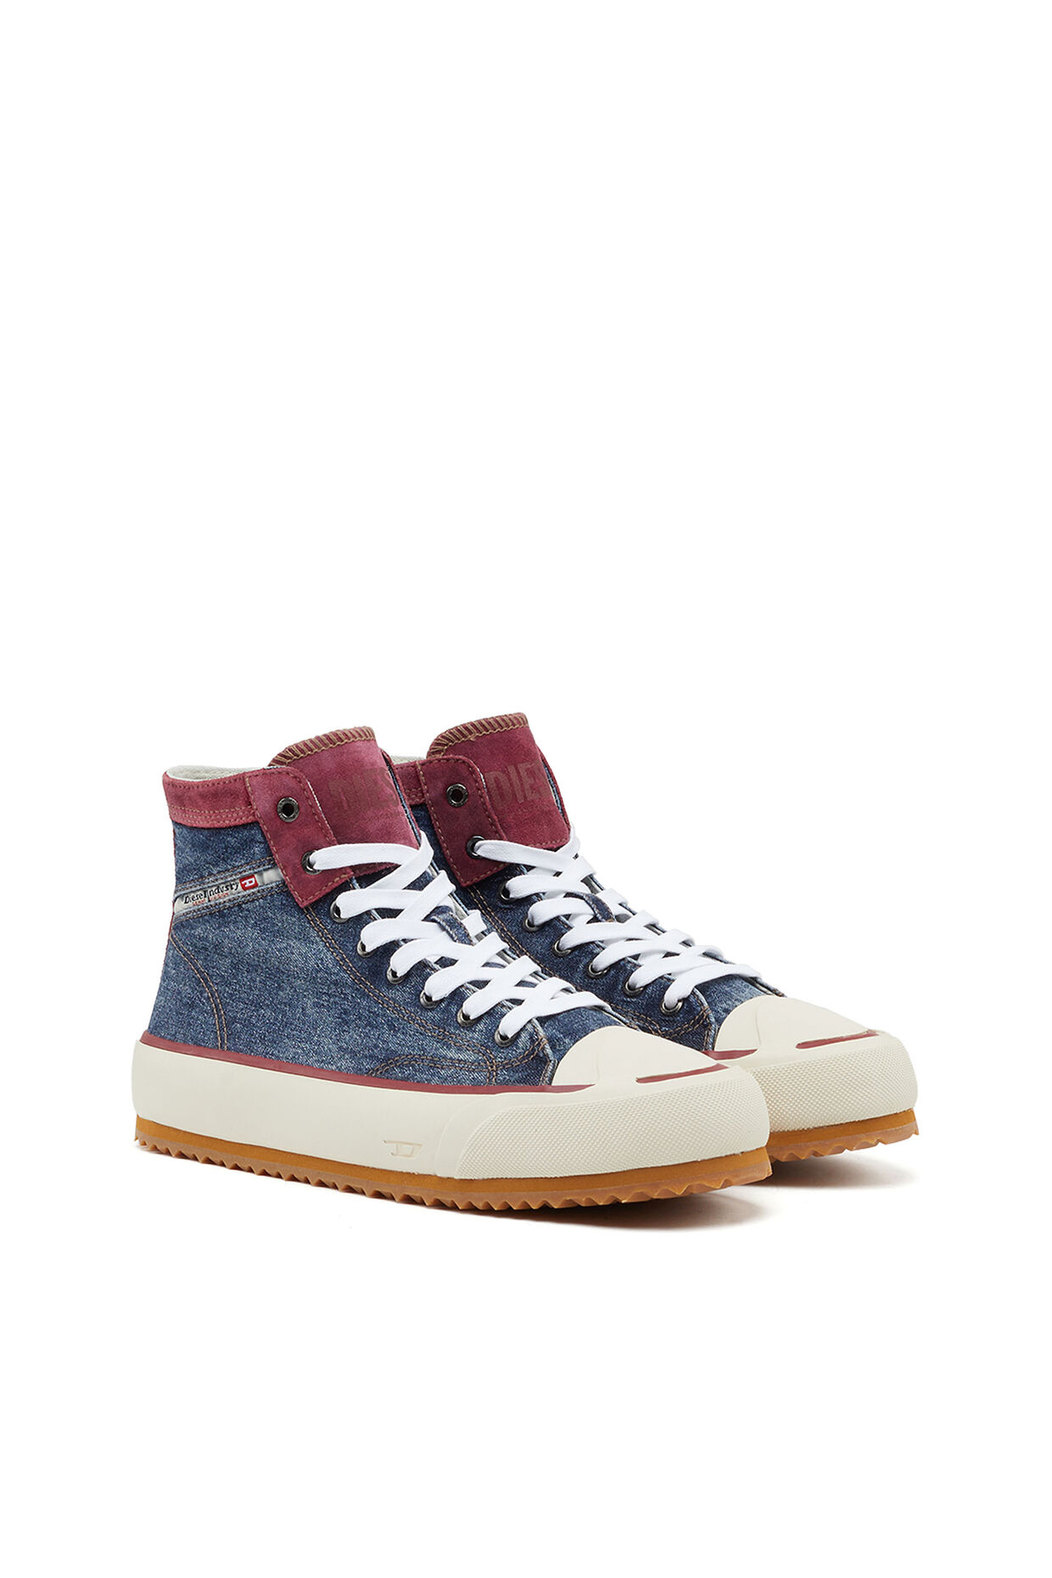 High-top sneakers in denim with flag